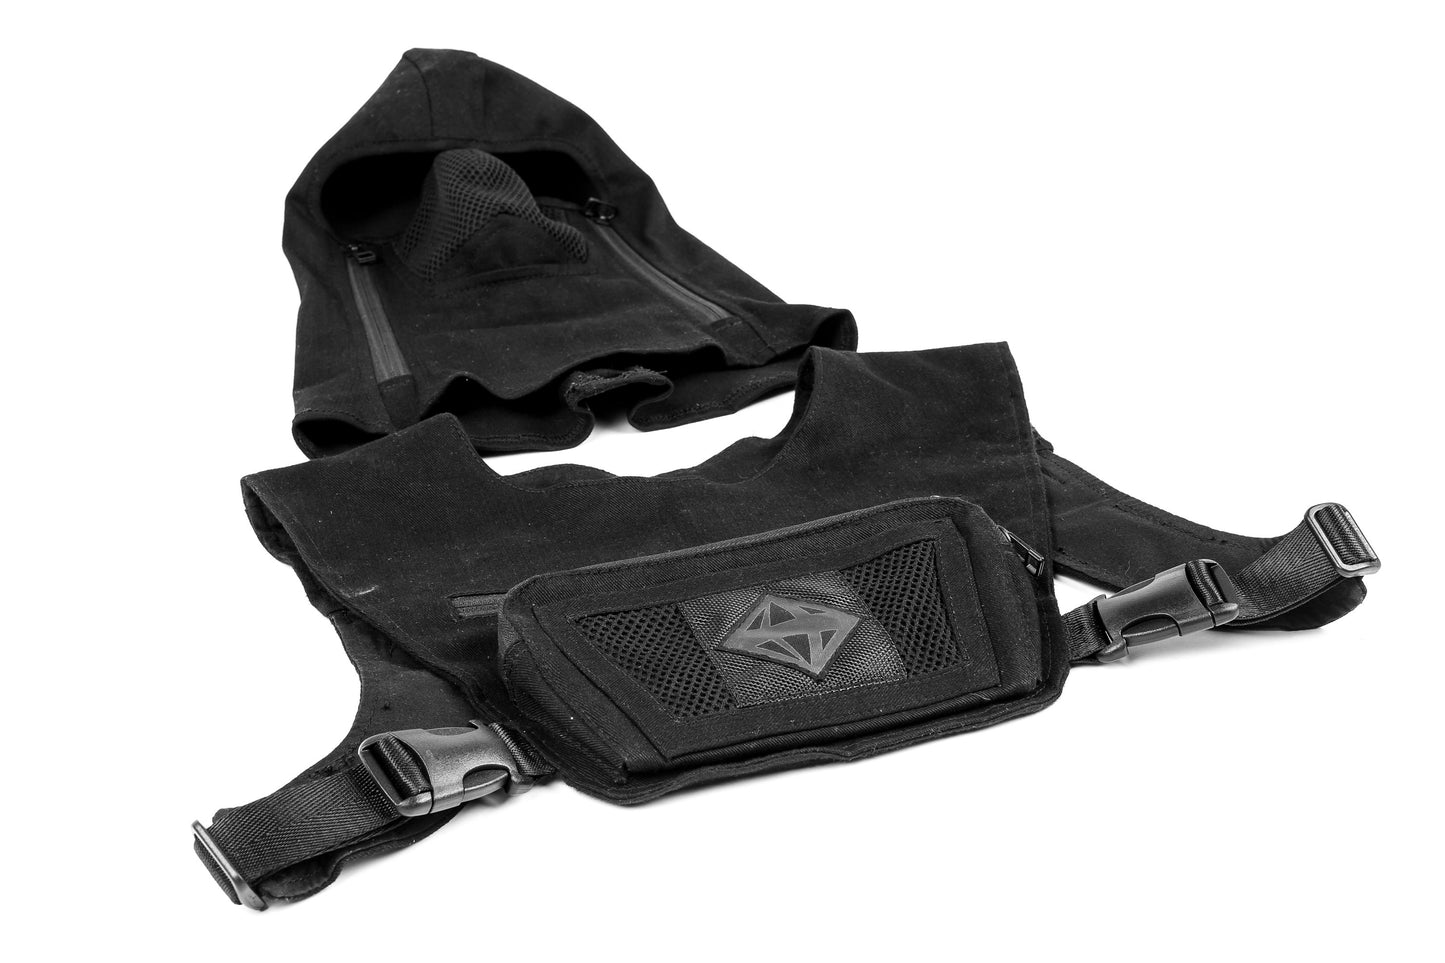 Ninja Sport Utility Chest Pack Vest With Phone Pocket and Facial Recognition Mask with Filter and Techwear Hood